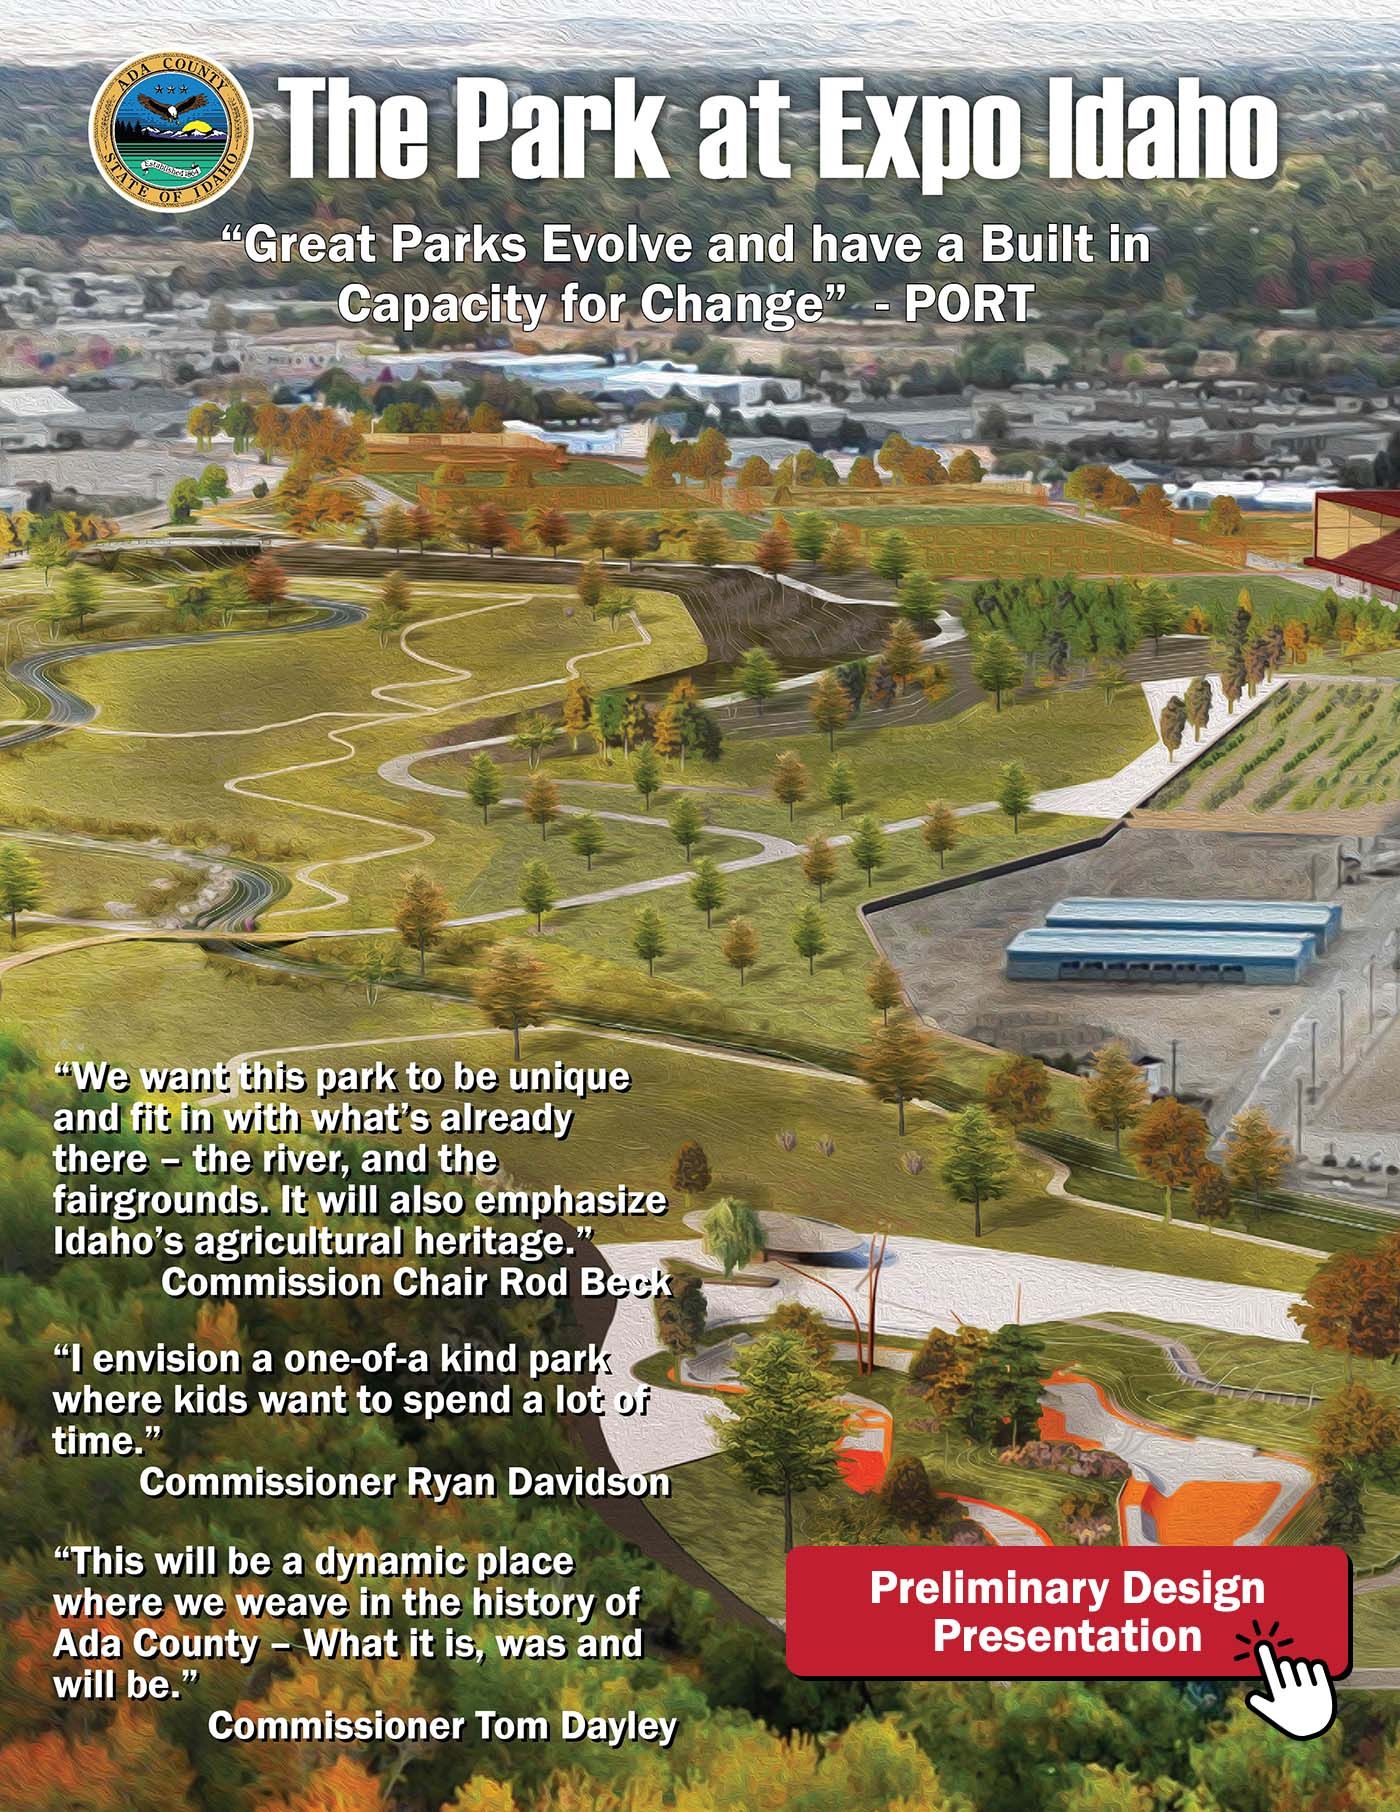 Quotes from commissioners about The Park at Expo Idaho project